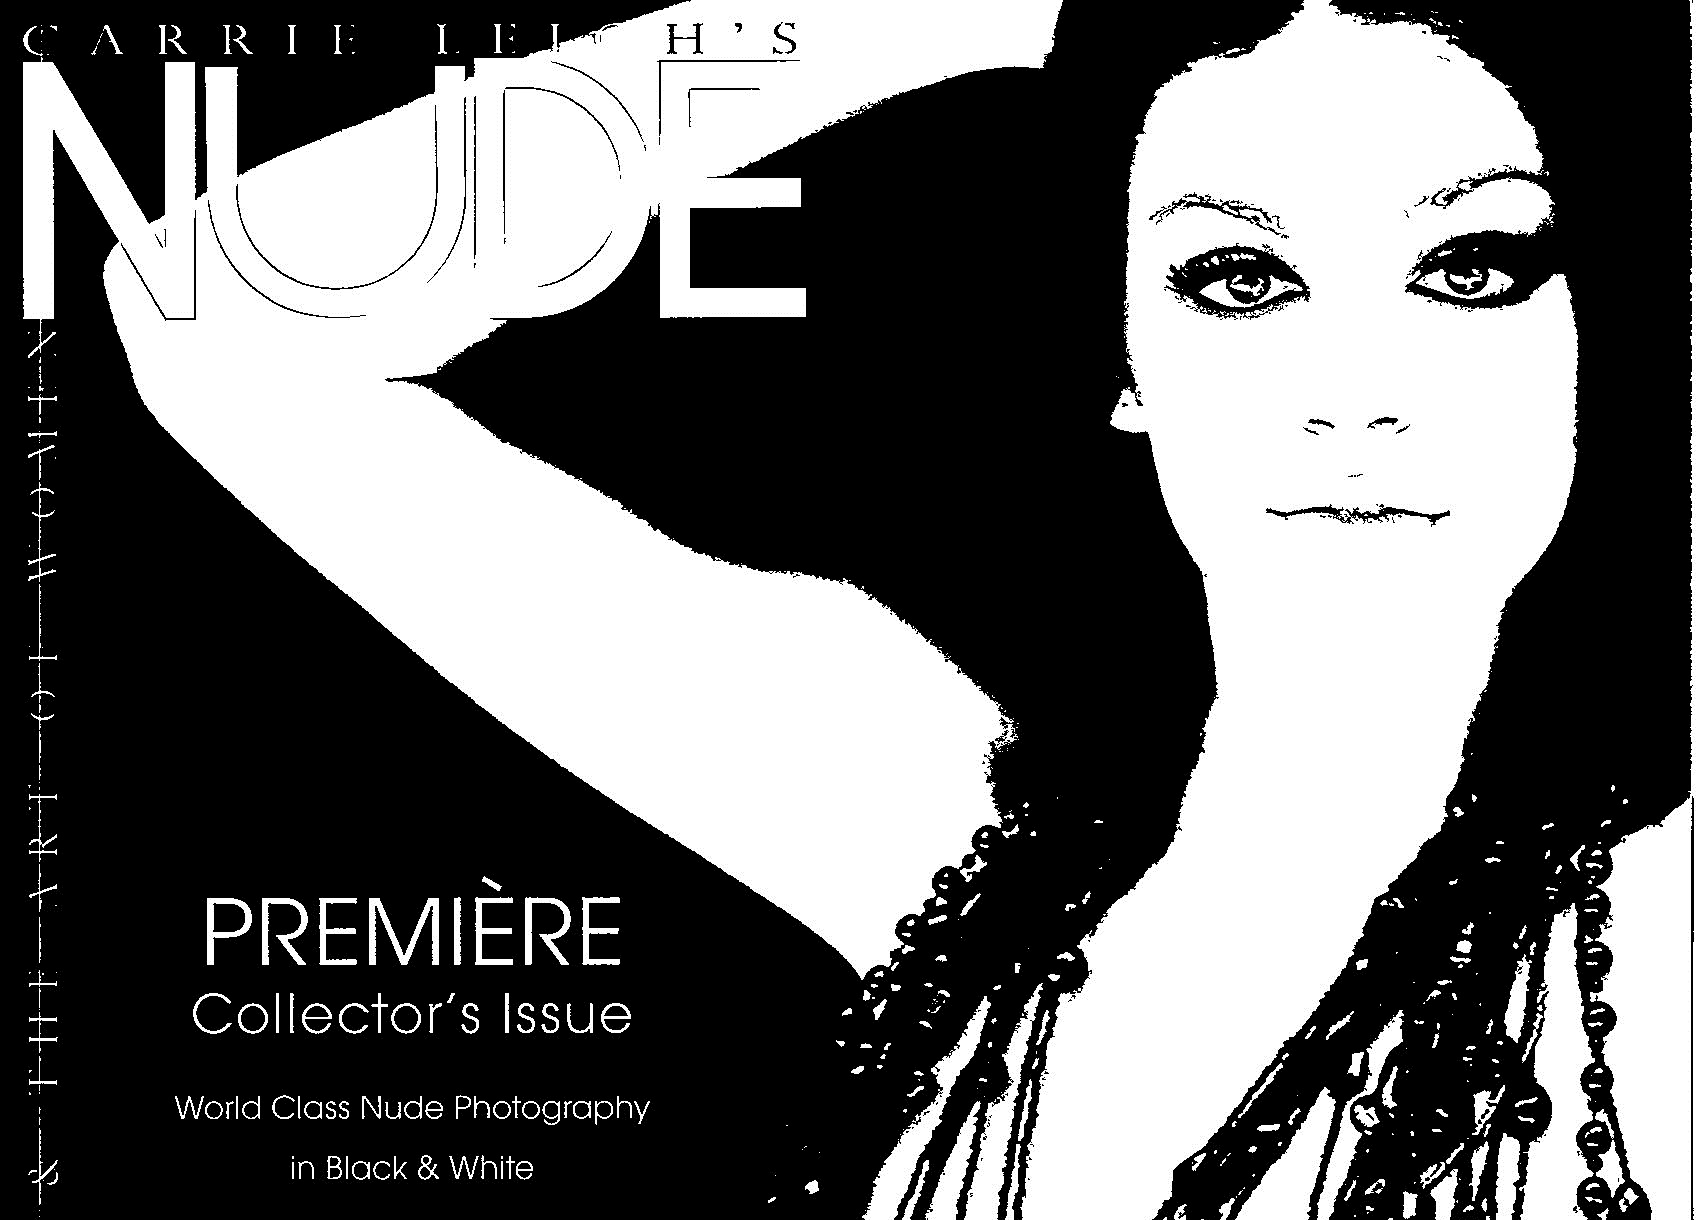 Black and White cover of Carrie Leigh's NUDE Premiere Collector's Issue showing woman posing